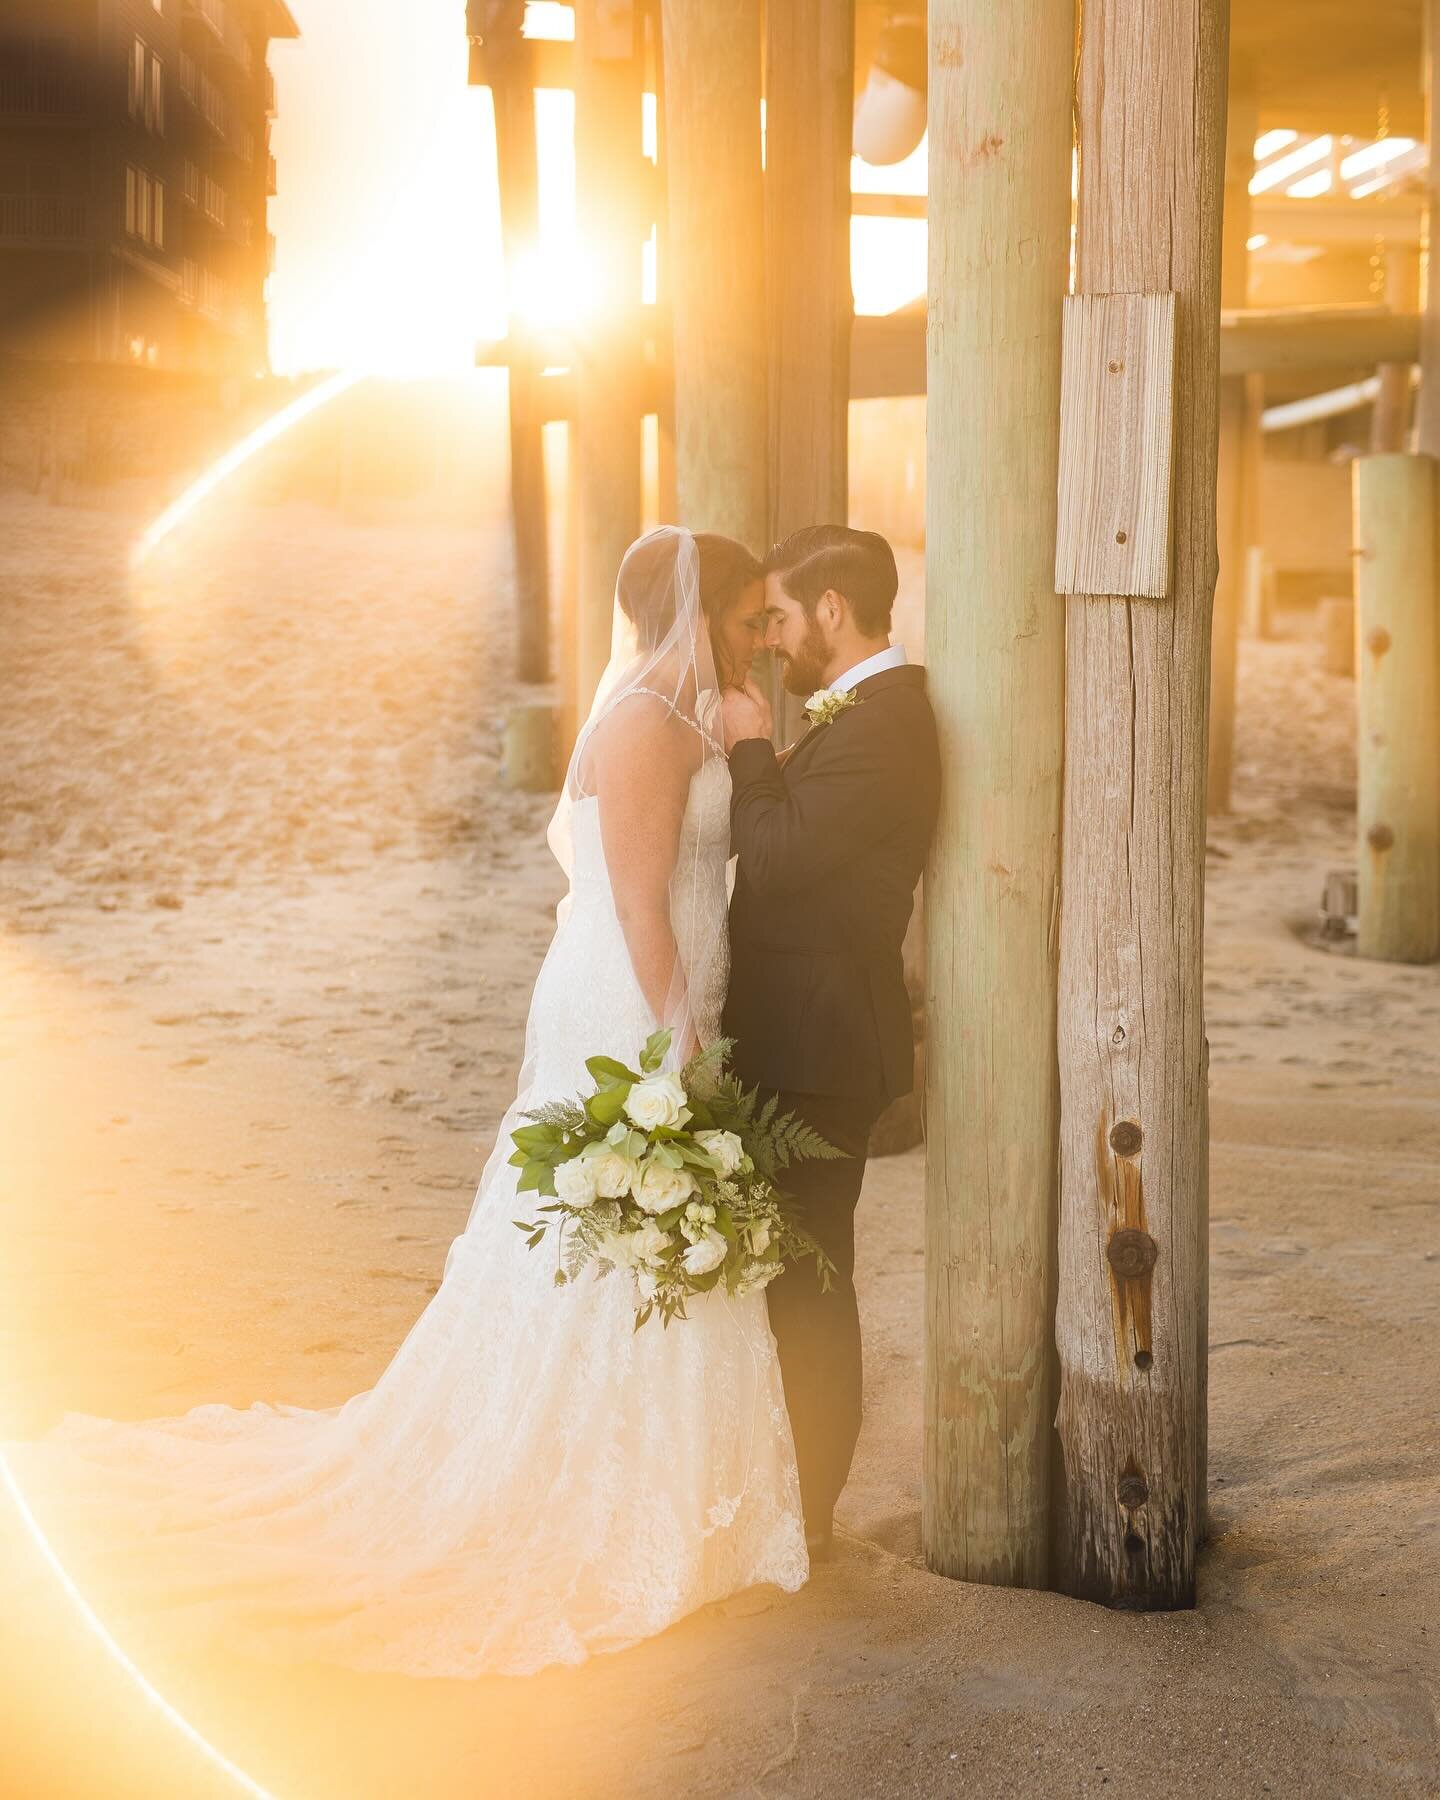 Meghan and Zach's wedding at the Kitty Hawk Pier was truly unforgettable! Their genuine sweetness and tireless efforts transformed the event into absolute perfection. It was a joy collaborating with this wonderful couple, and we extend our heartfelt 